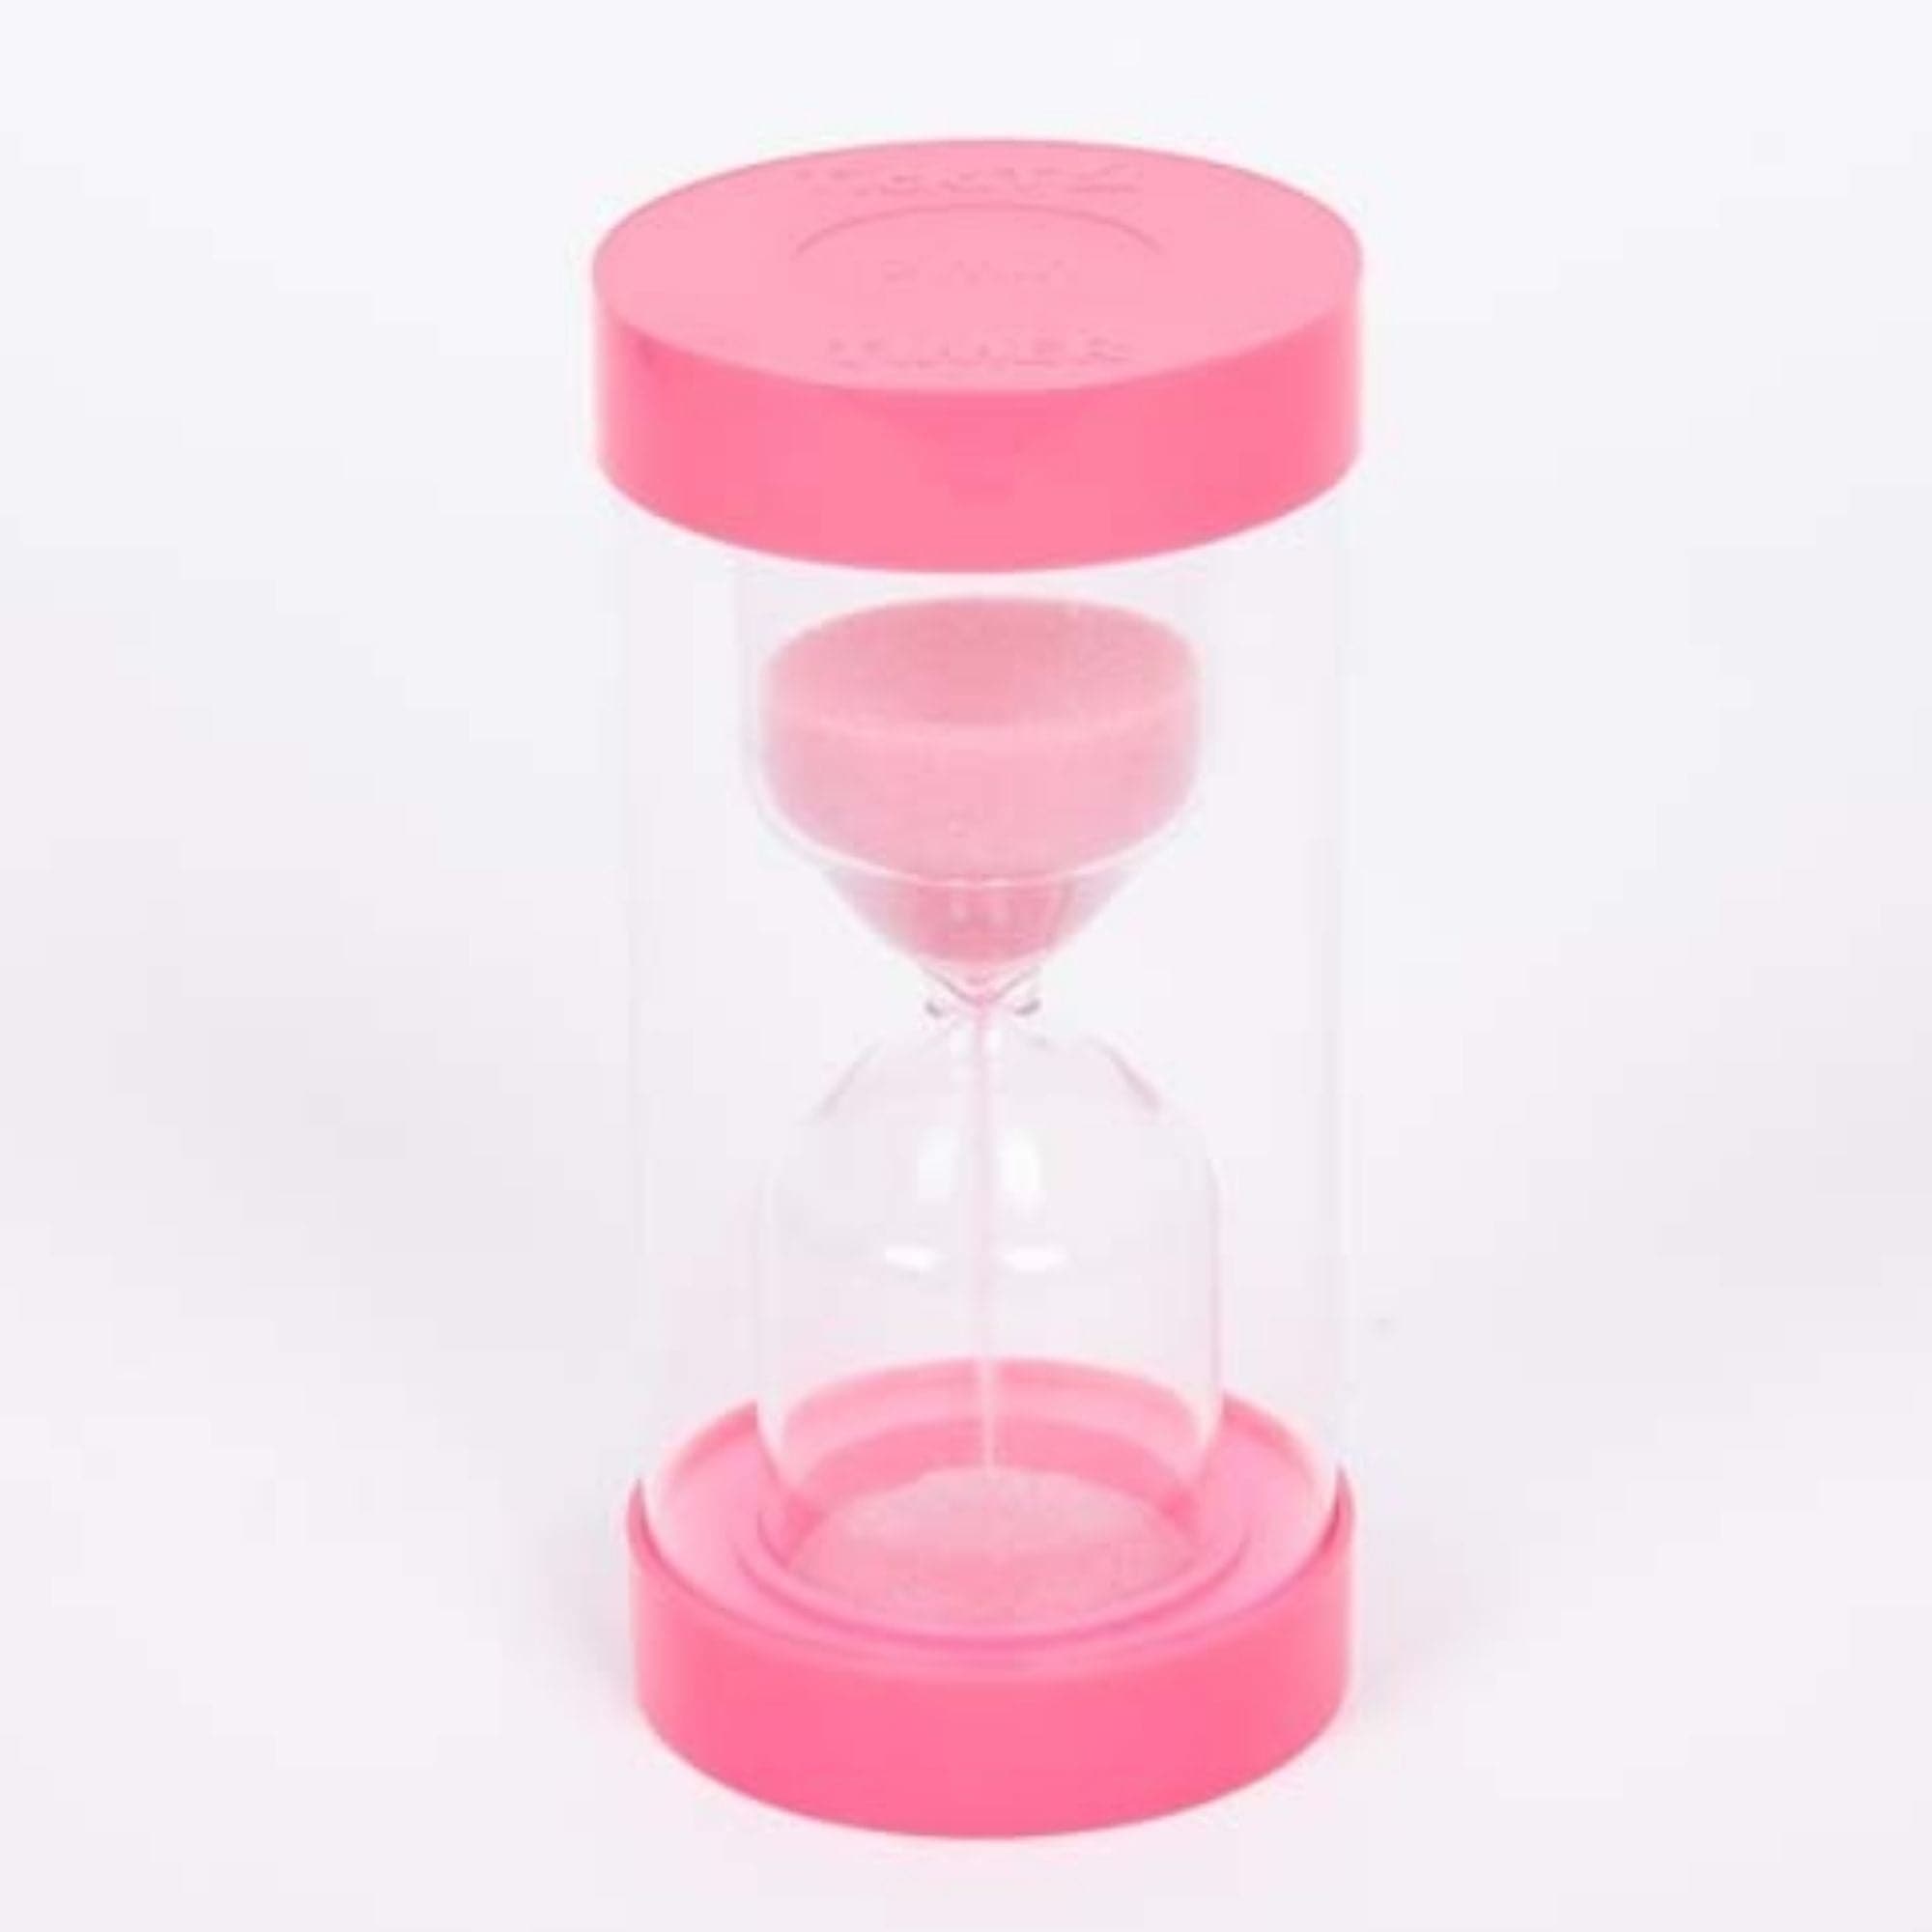 TickiT Colour Bright Sand Timer 2 Minute, The TickiT Colour Bright Sand Timer 2 Minute is a part of our new range of excellent value robust sand timers offer the same traditional visual demonstration of the passing of time, but with a new rounded design including a shatterproof plastic barrier to protect the sleek modernised glass bulb inside. Easy to understand for young children, ideal for use in timed games or activities and for timing experiments in maths or science. Colour coded to match the other sand